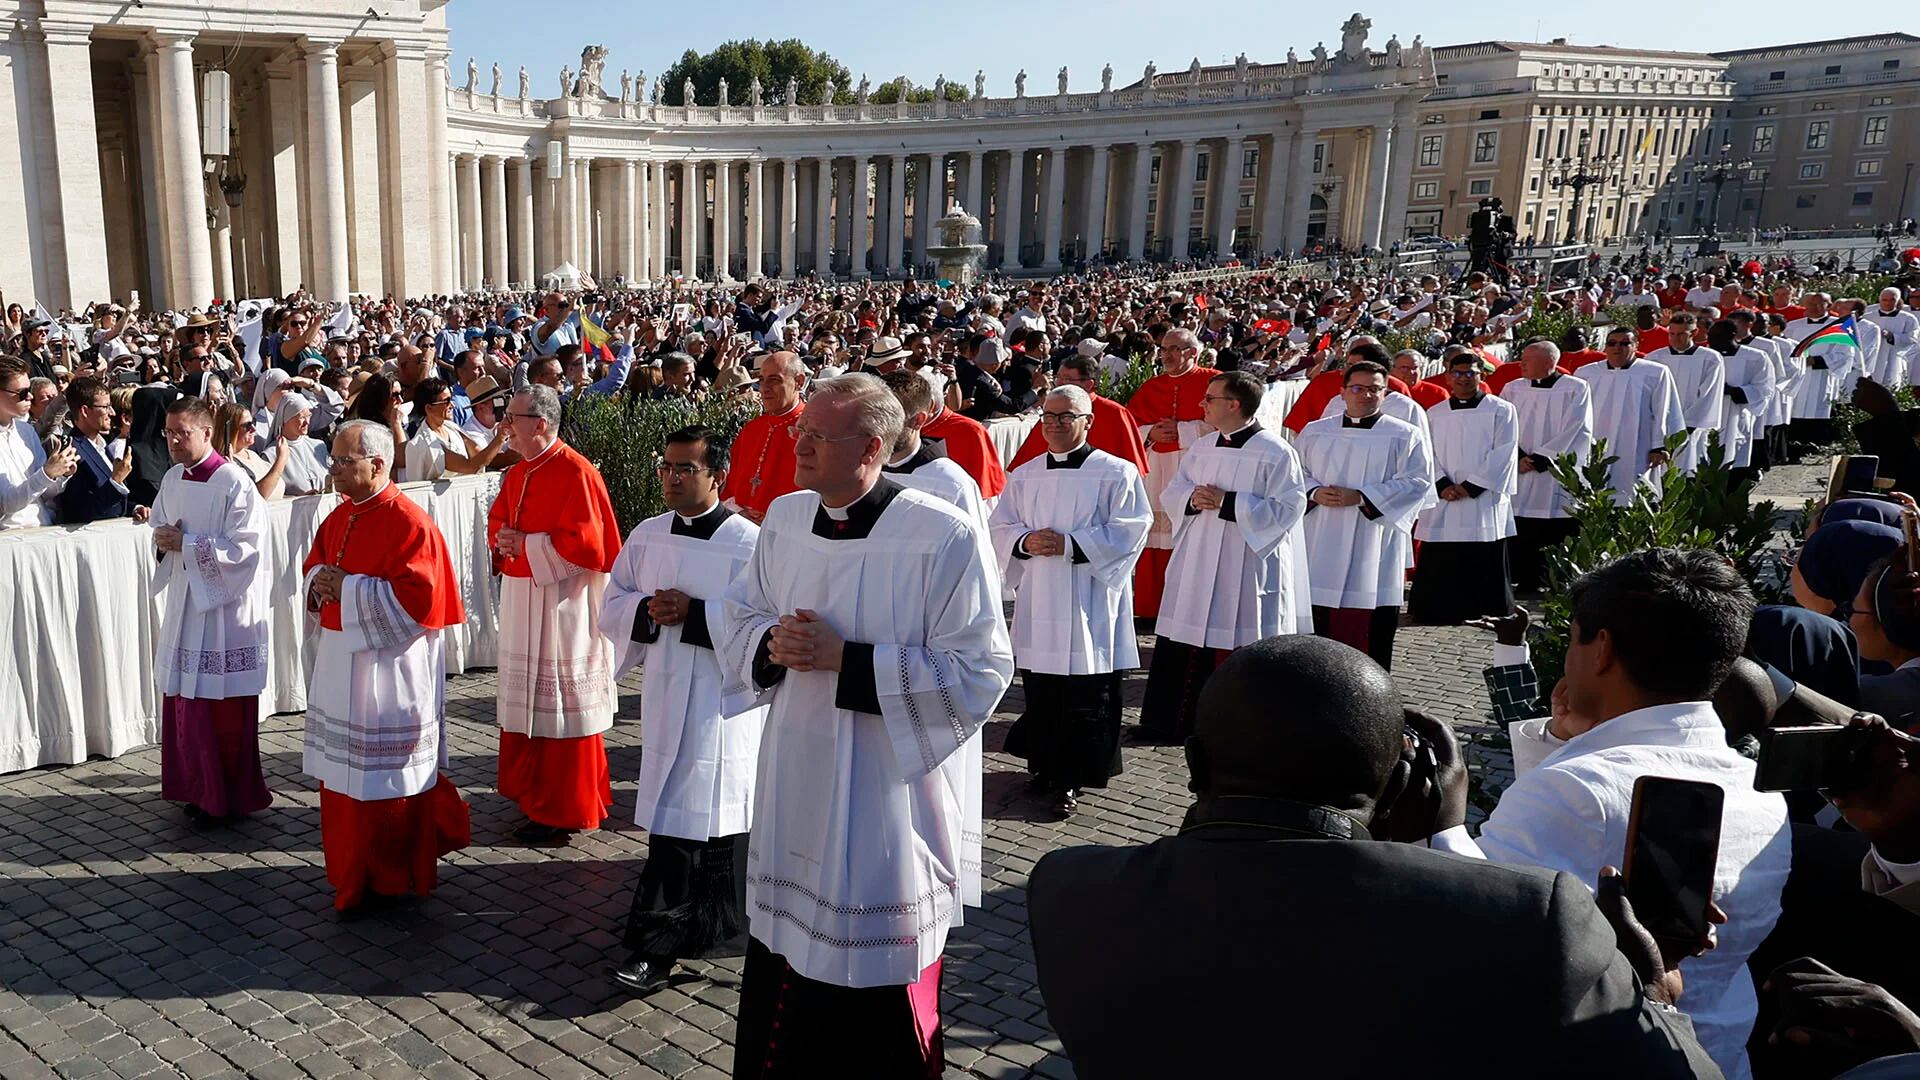 Newly elected cardinal arrive in a procession in St. Peter's Square at The Vatican for their elevation by Pope Francis, Saturday, Sept. 30, 2023. (AP Photo/Riccardo De Luca)